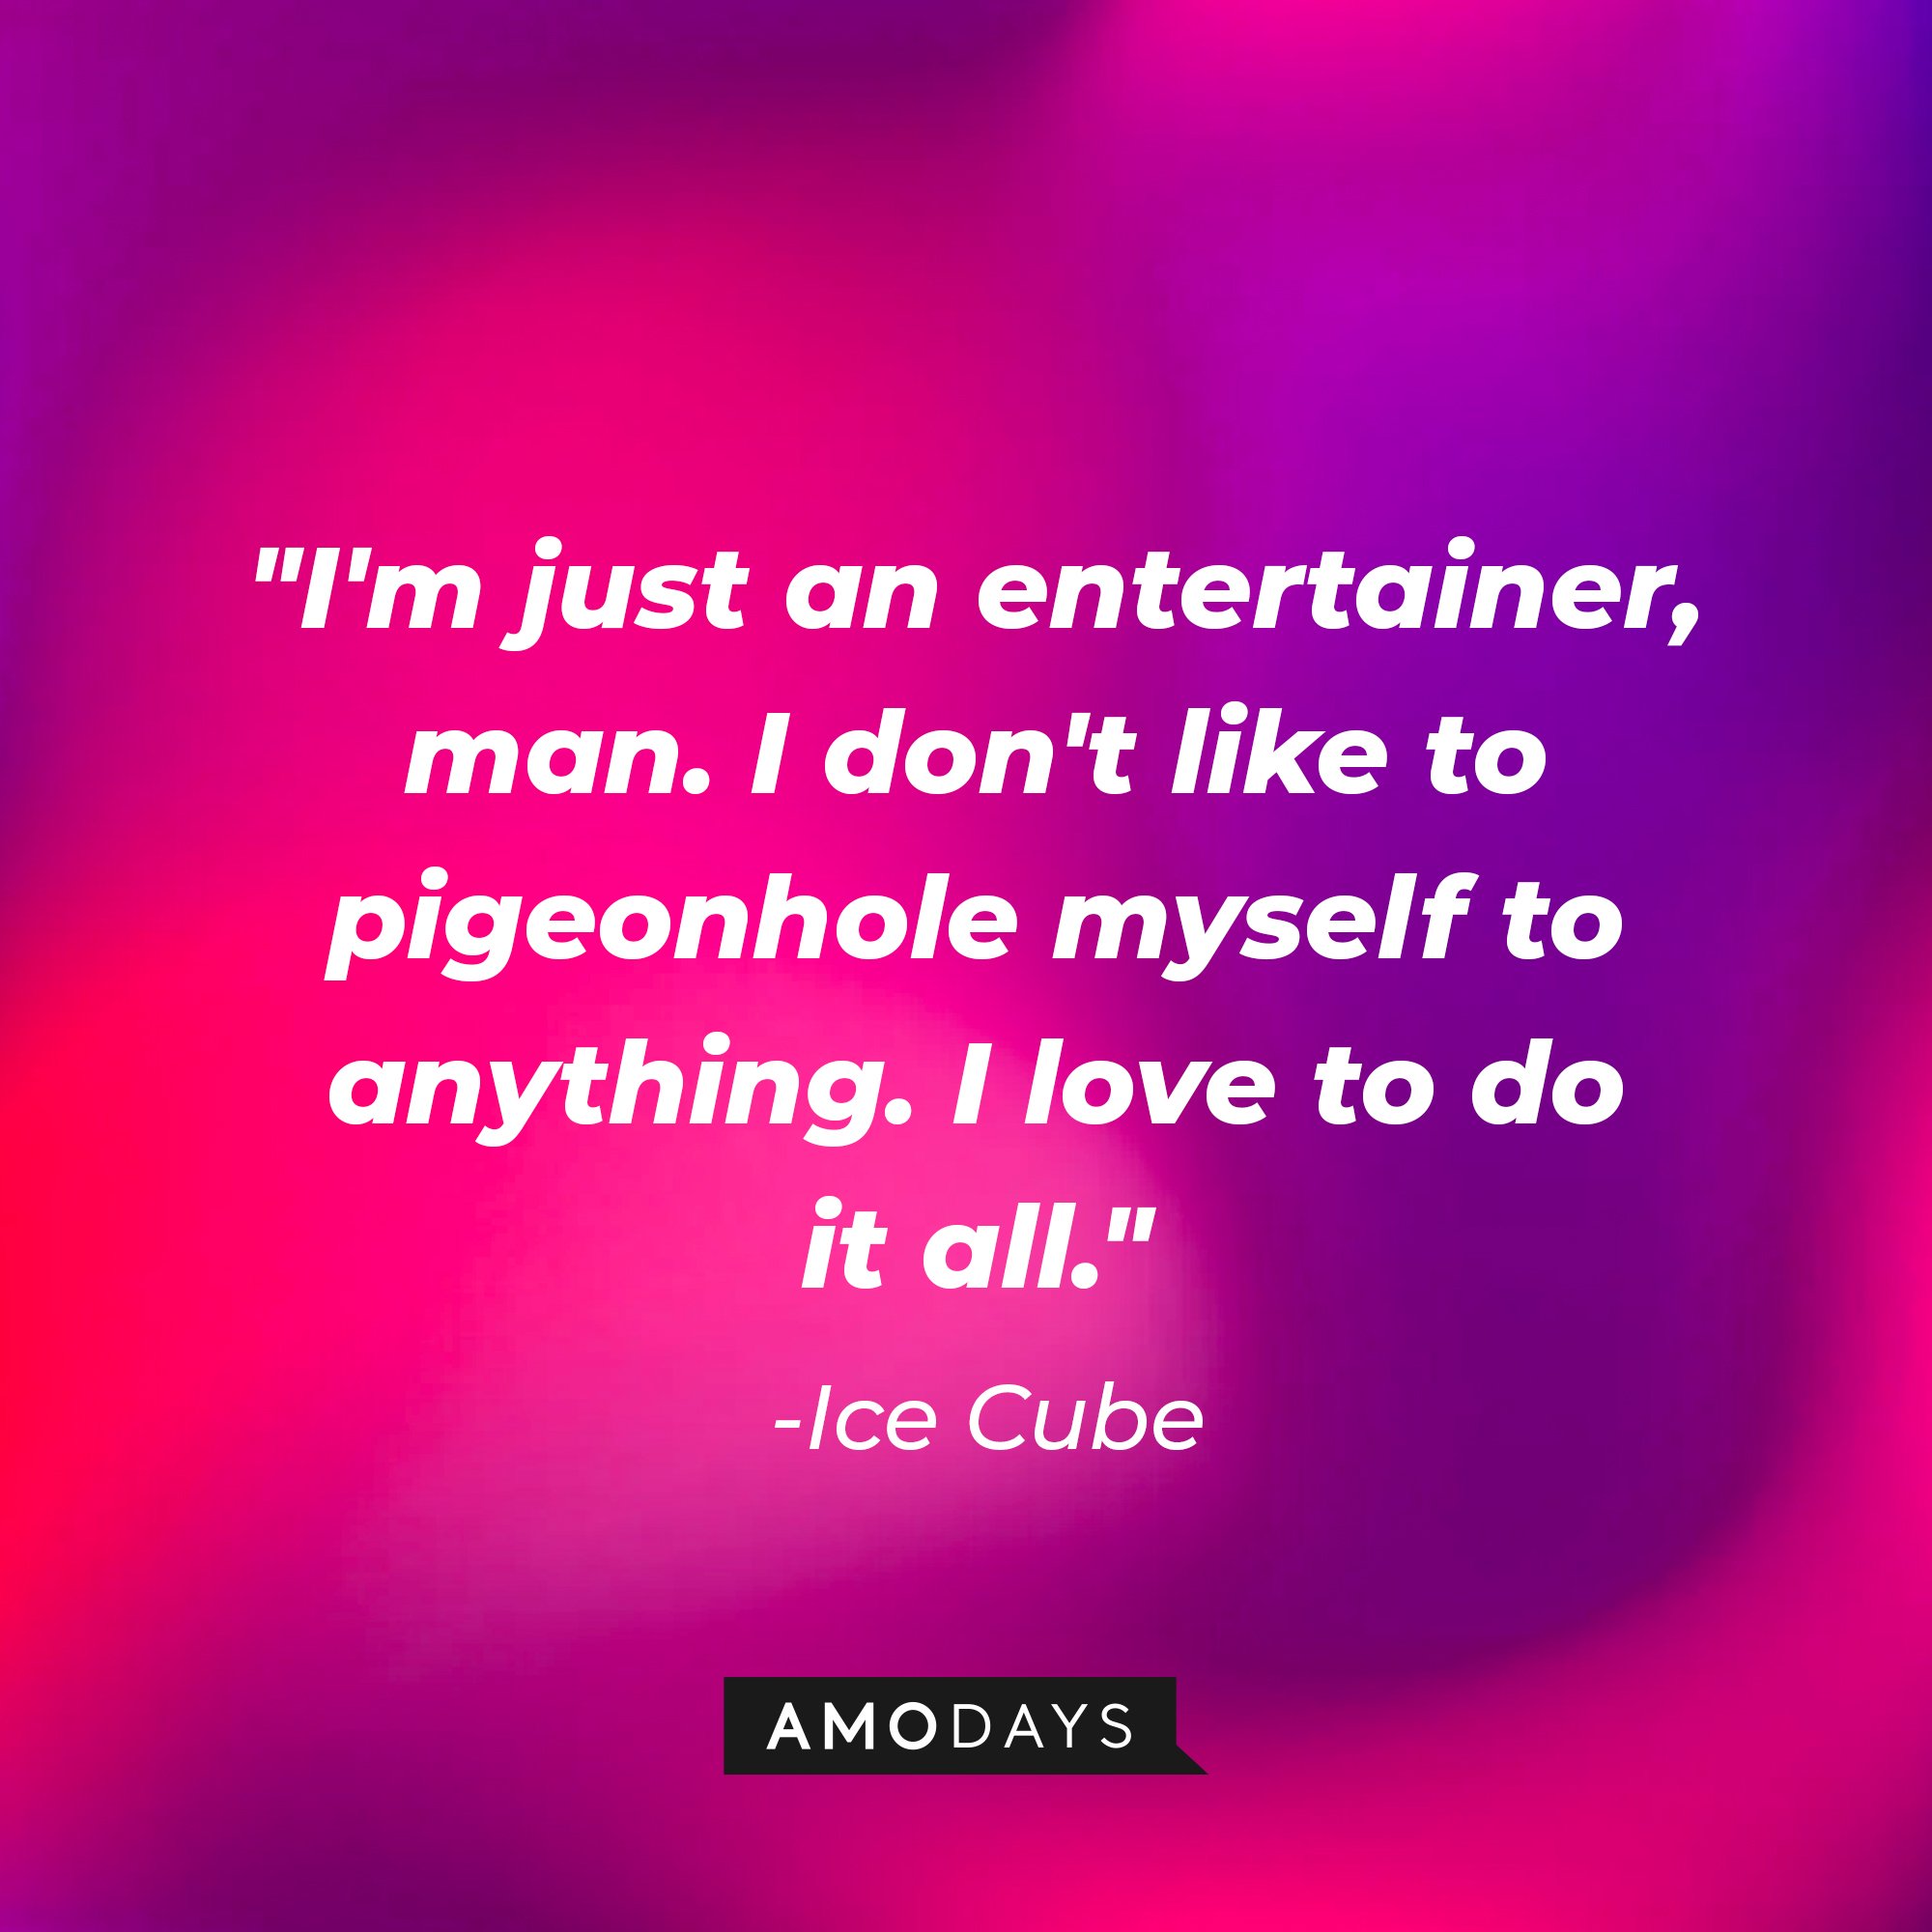 Ice Cube's quote: "I'm just an entertainer, man. I don't like to pigeonhole myself to anything. I love to do it all." — Ice Cube | Image: AmoDays